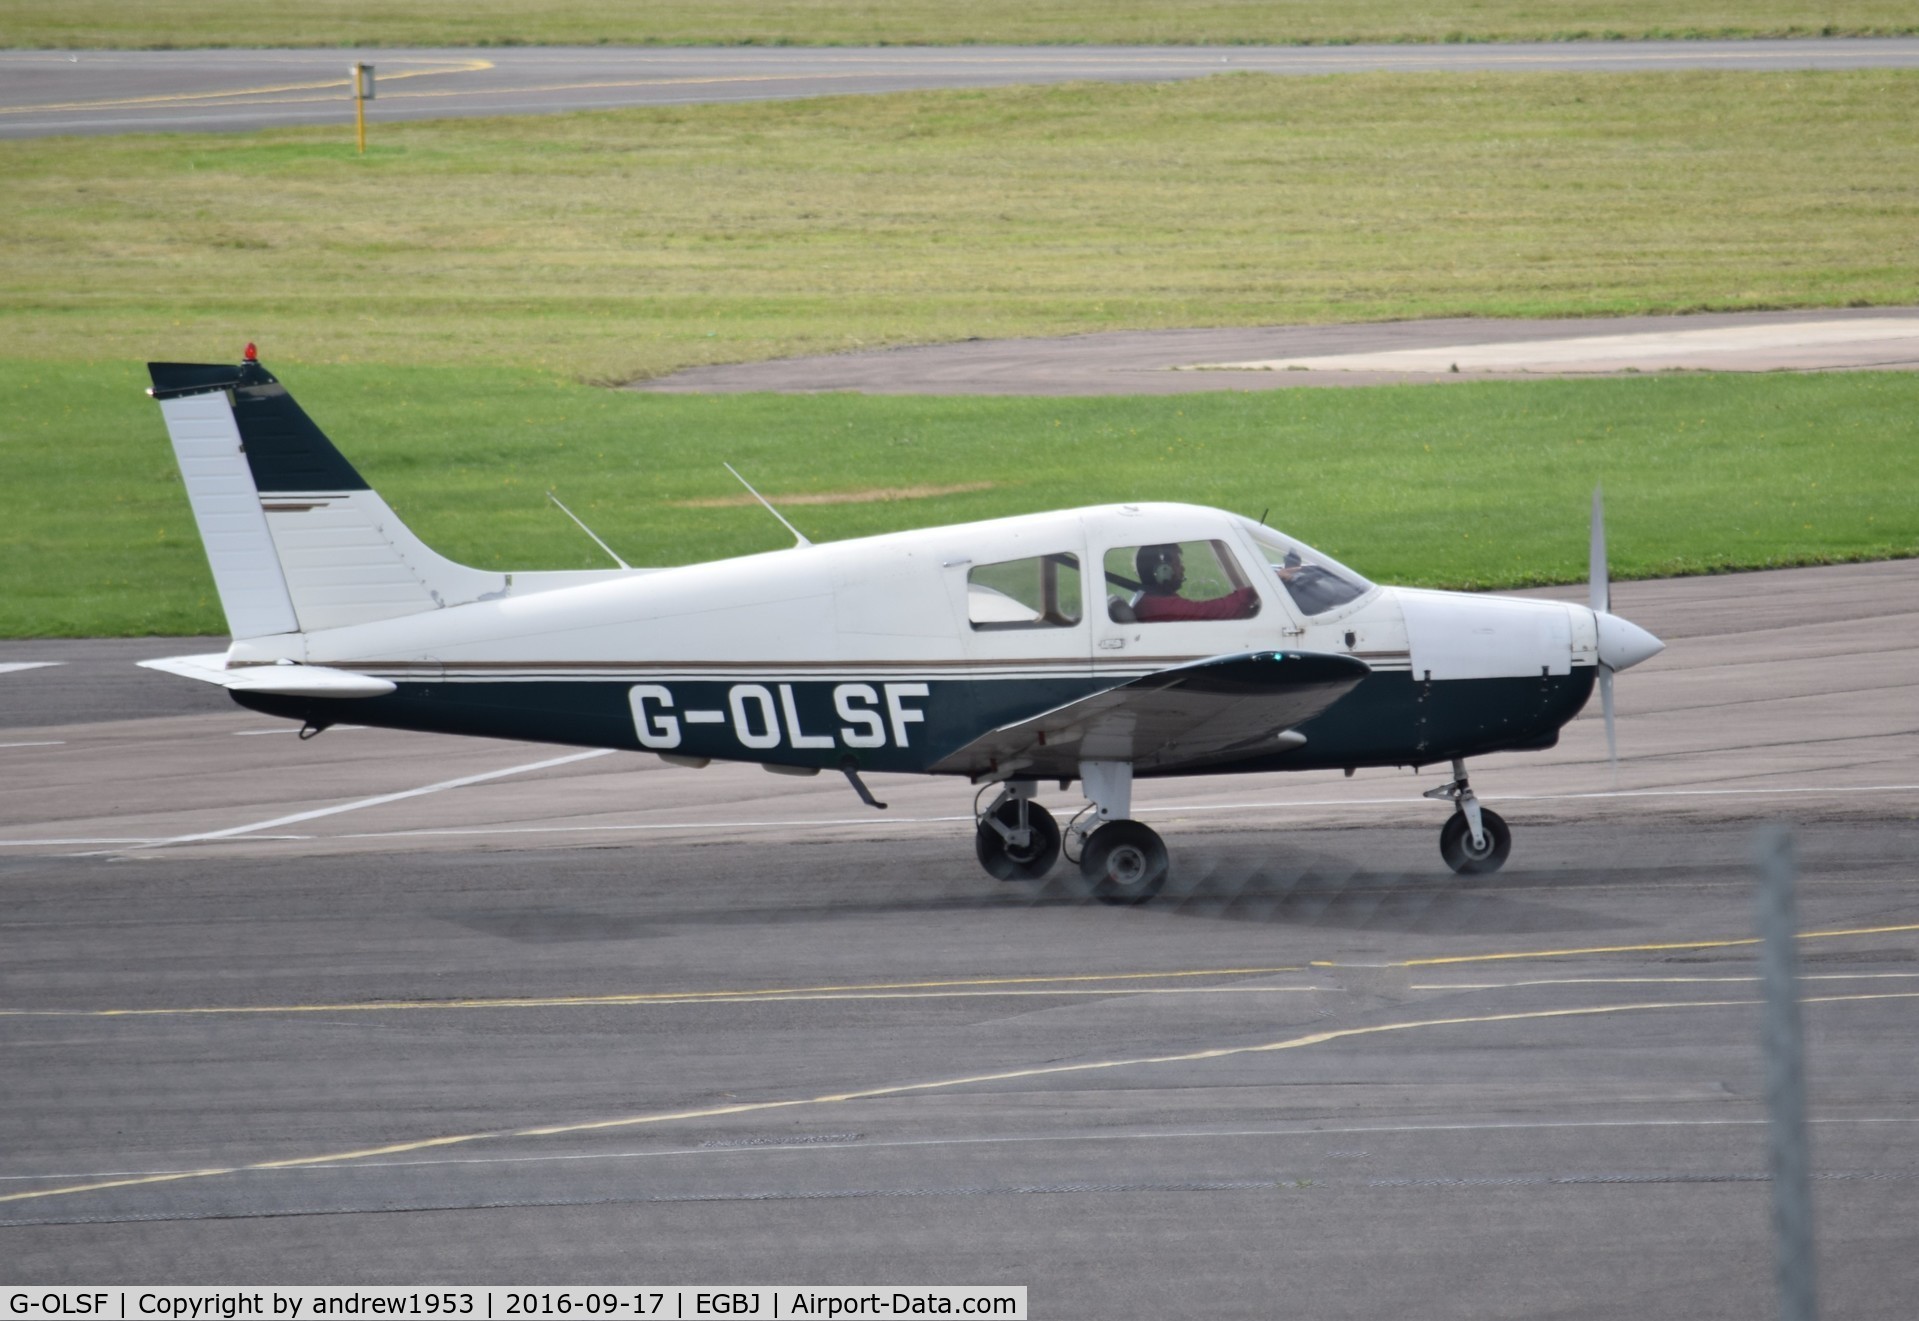 G-OLSF, 1989 Piper PA-28-161 Cadet C/N 2841284, G-OLSF at Gloucestershire Airport.